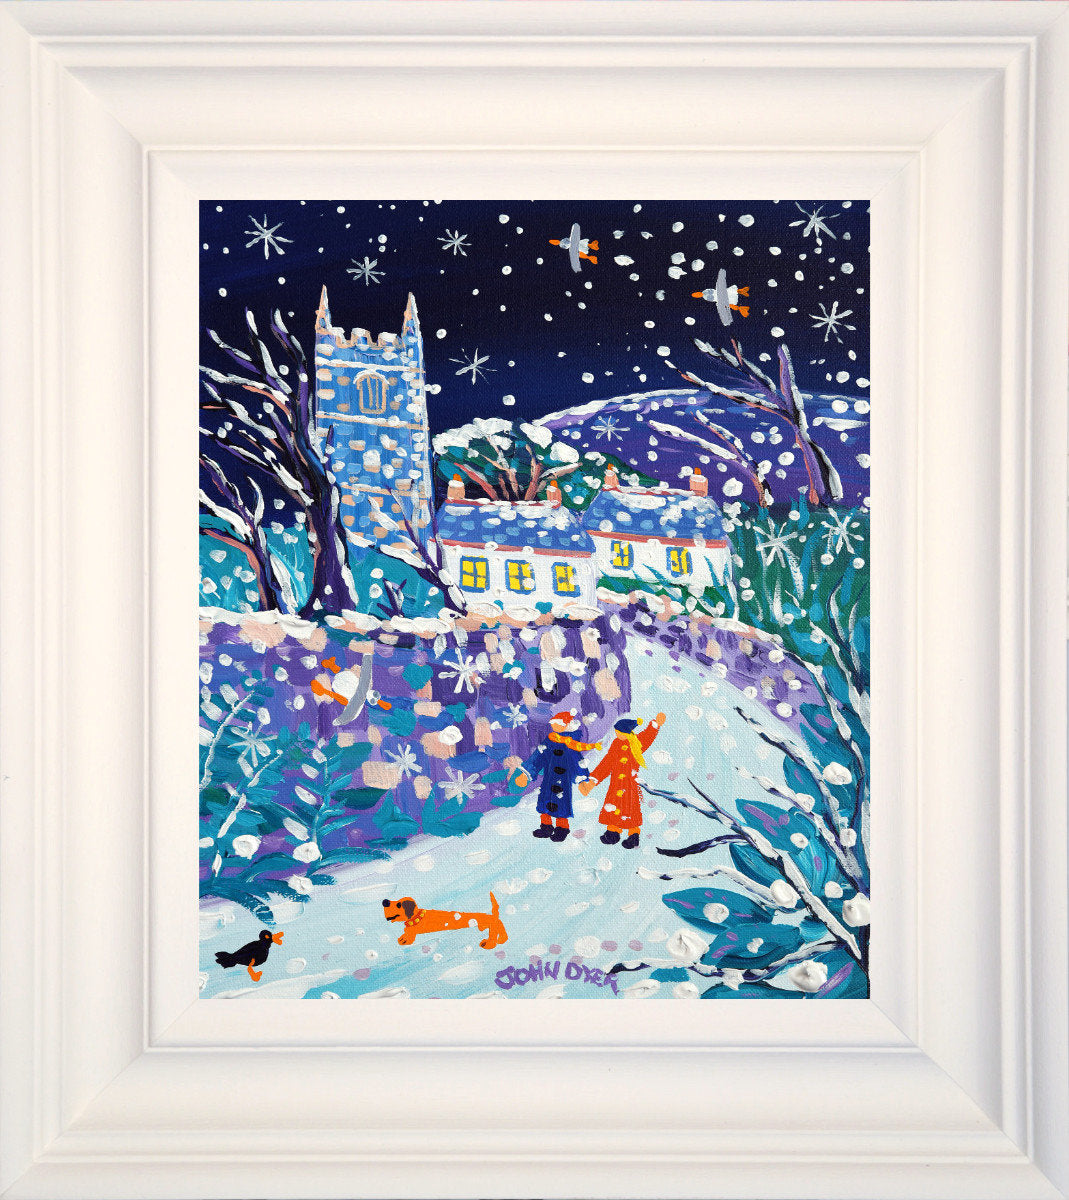 &#39;Walking in the Snow, Zennor&#39;, 12 x 10 inches original art acrylic on canvas. Paintings of Cornwall by Cornish Artist John Dyer from our Cornwall Art Gallery